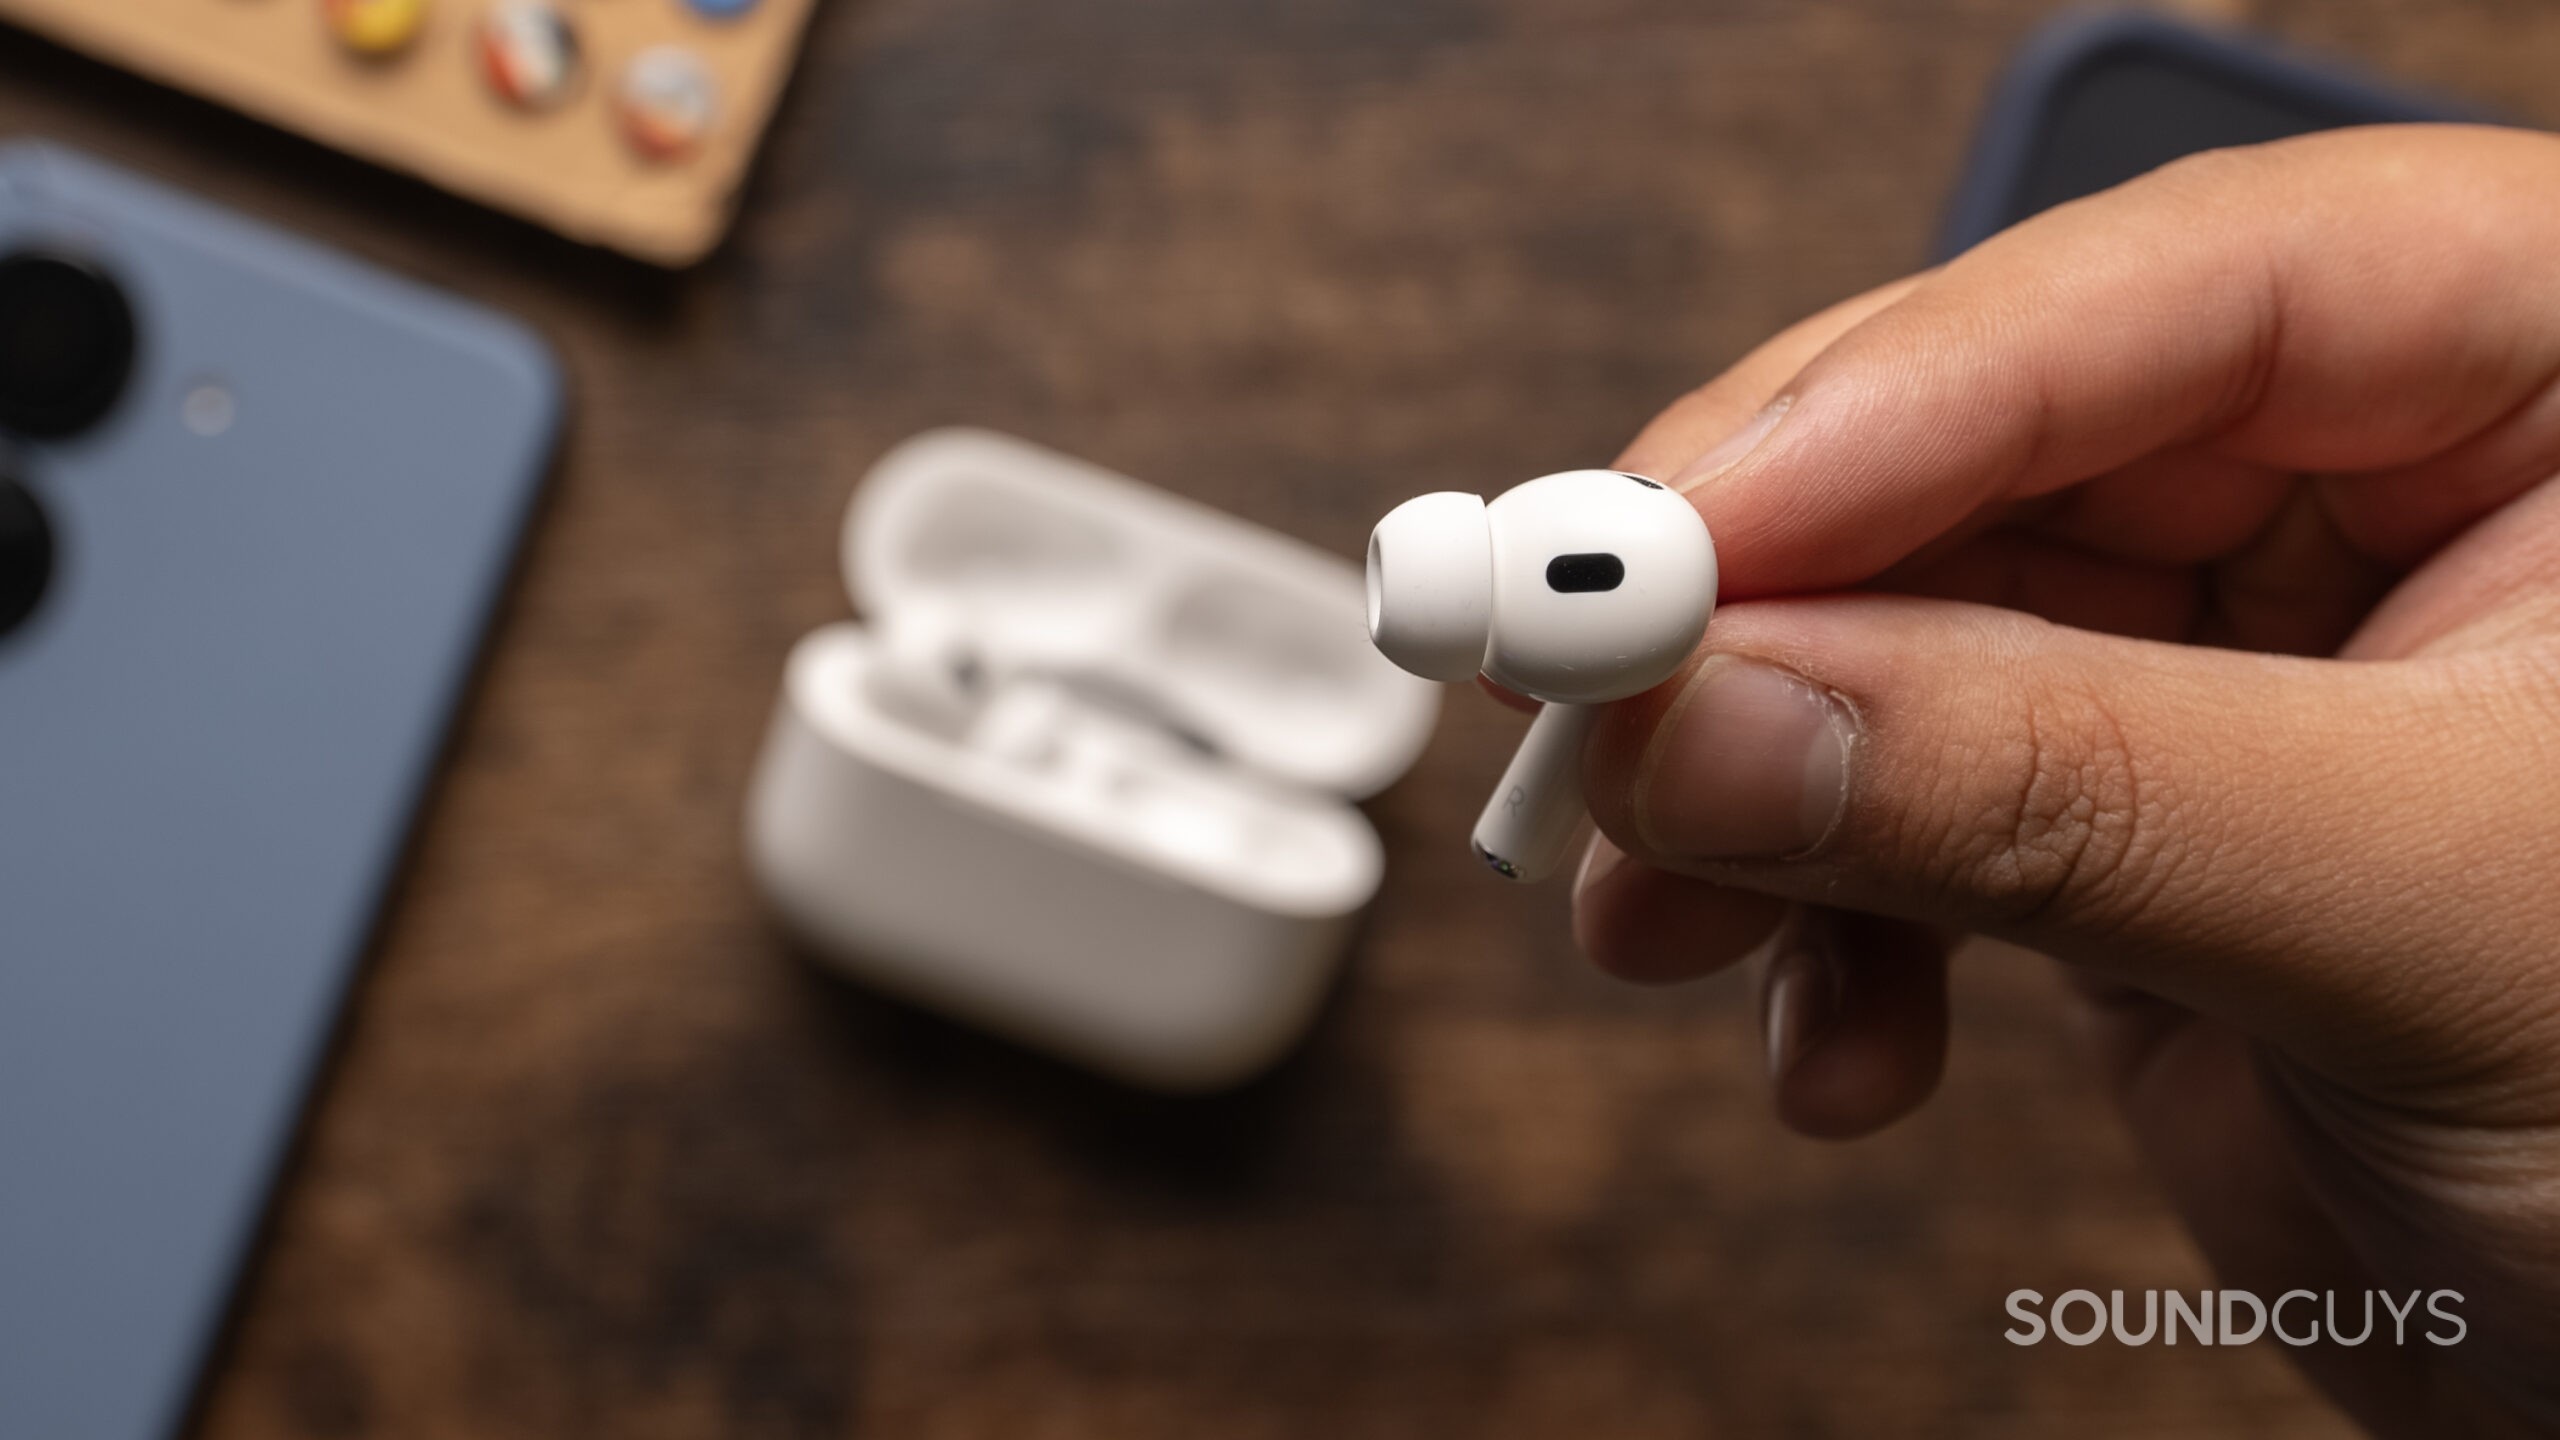 A hand holds the Apple AirPods Pro (2nd generation) bud showing the side.